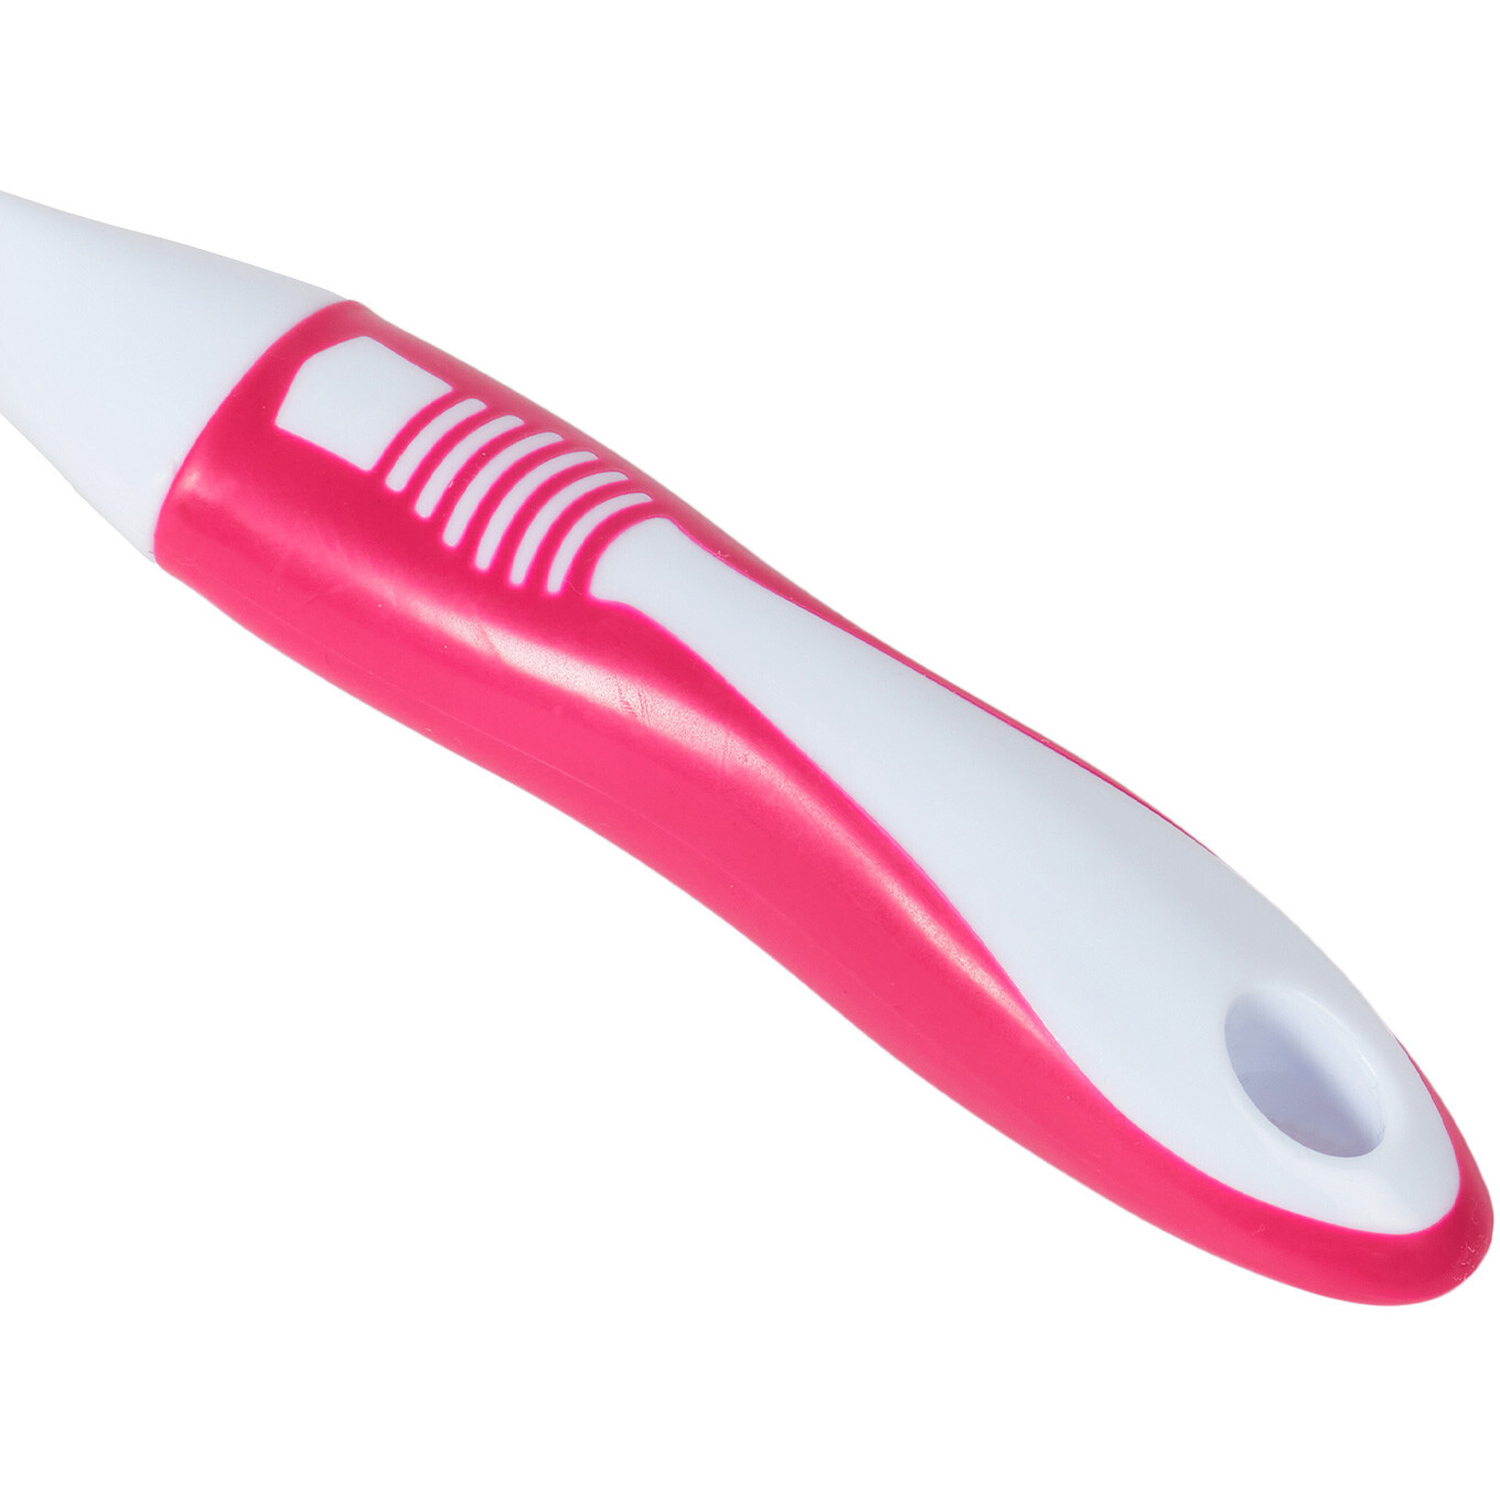 Daisy Pink Squeegee Image 3